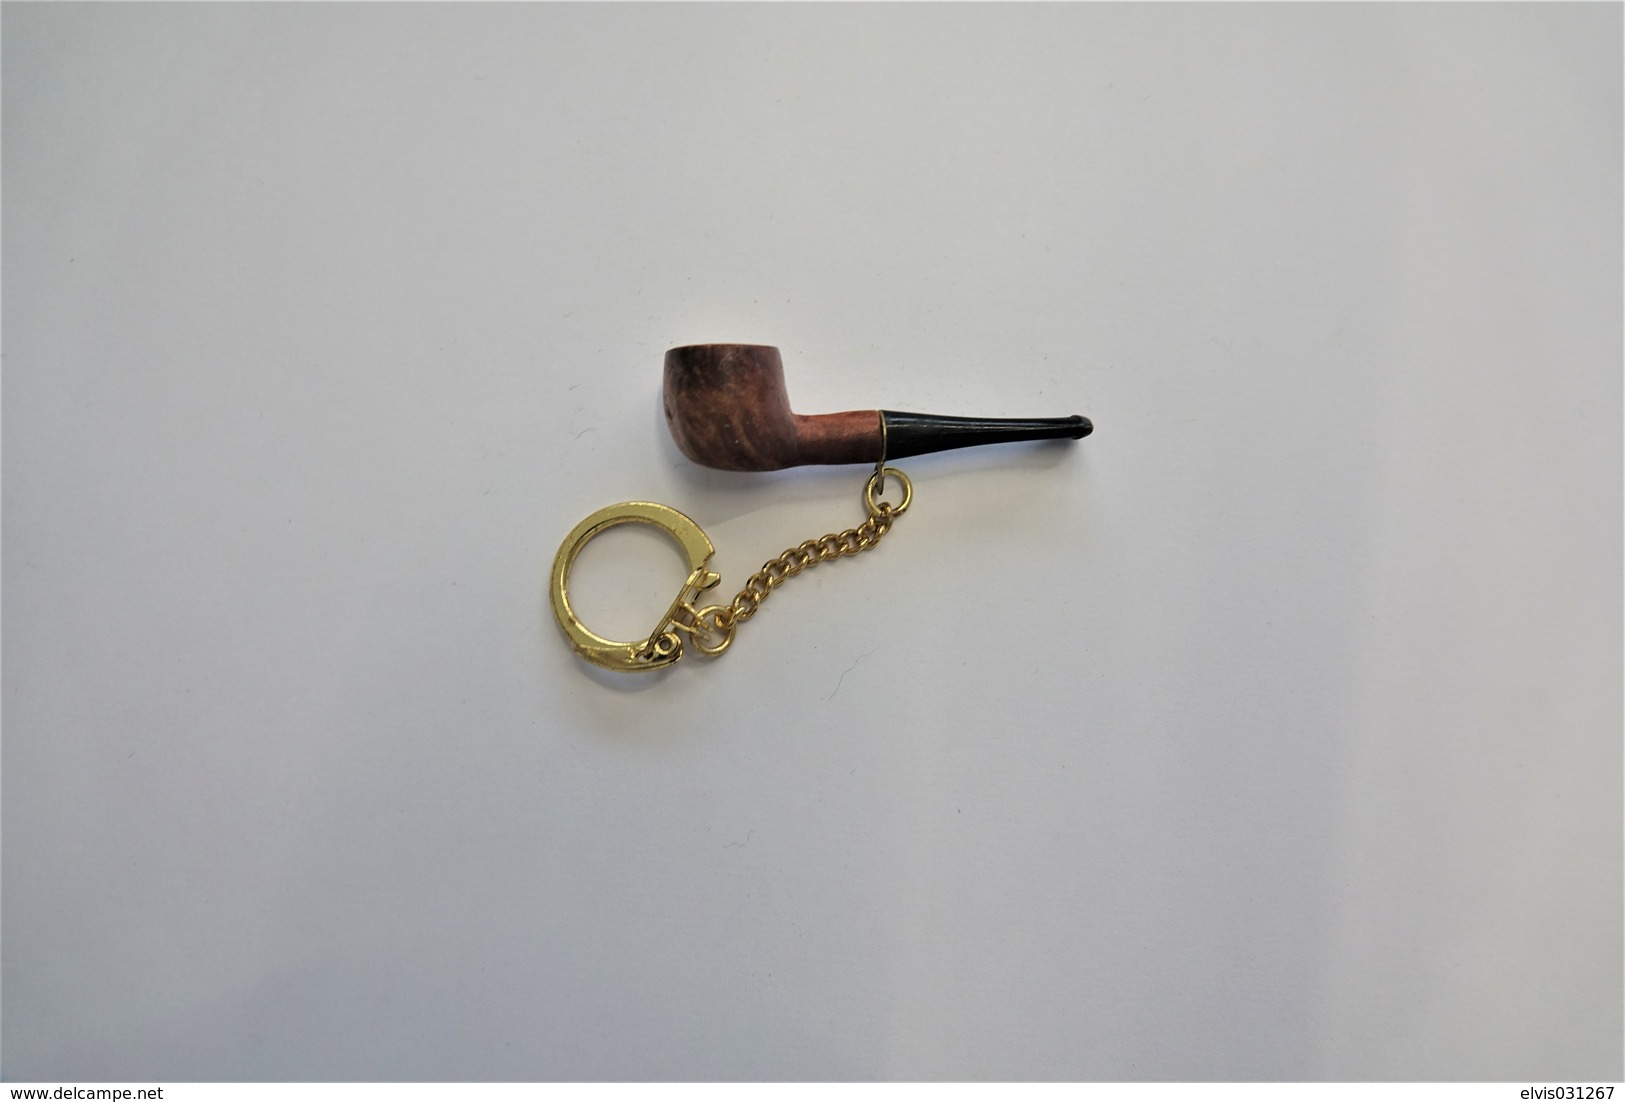 Vintage KEYCHAIN : WOODEN PIPE  - RaRe - 1950-60's - Porte-cles - Key-rings